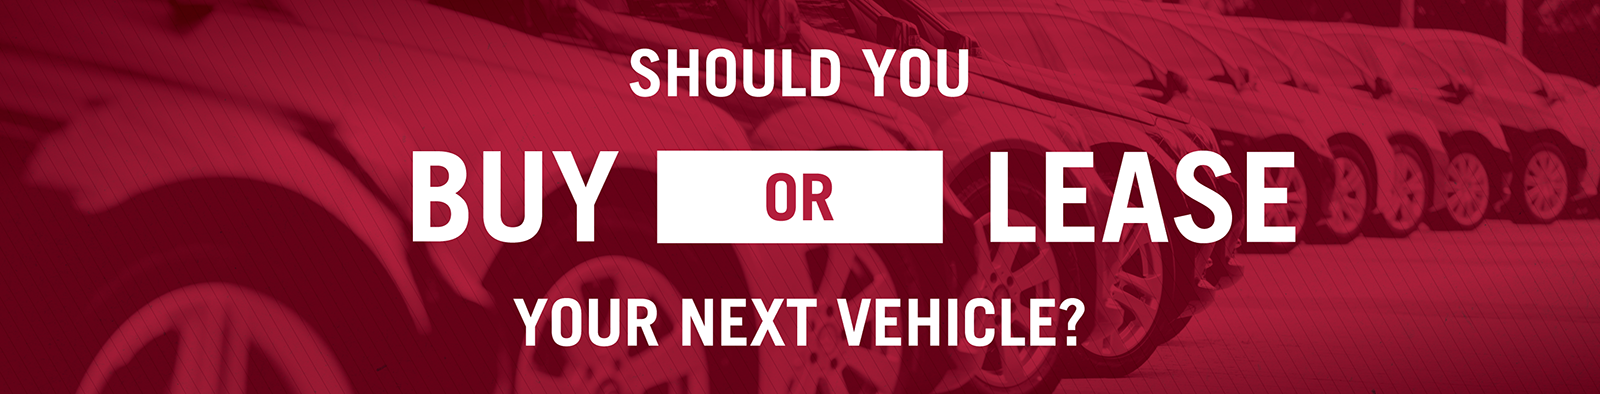 Should you buy or lease your next vehicle?